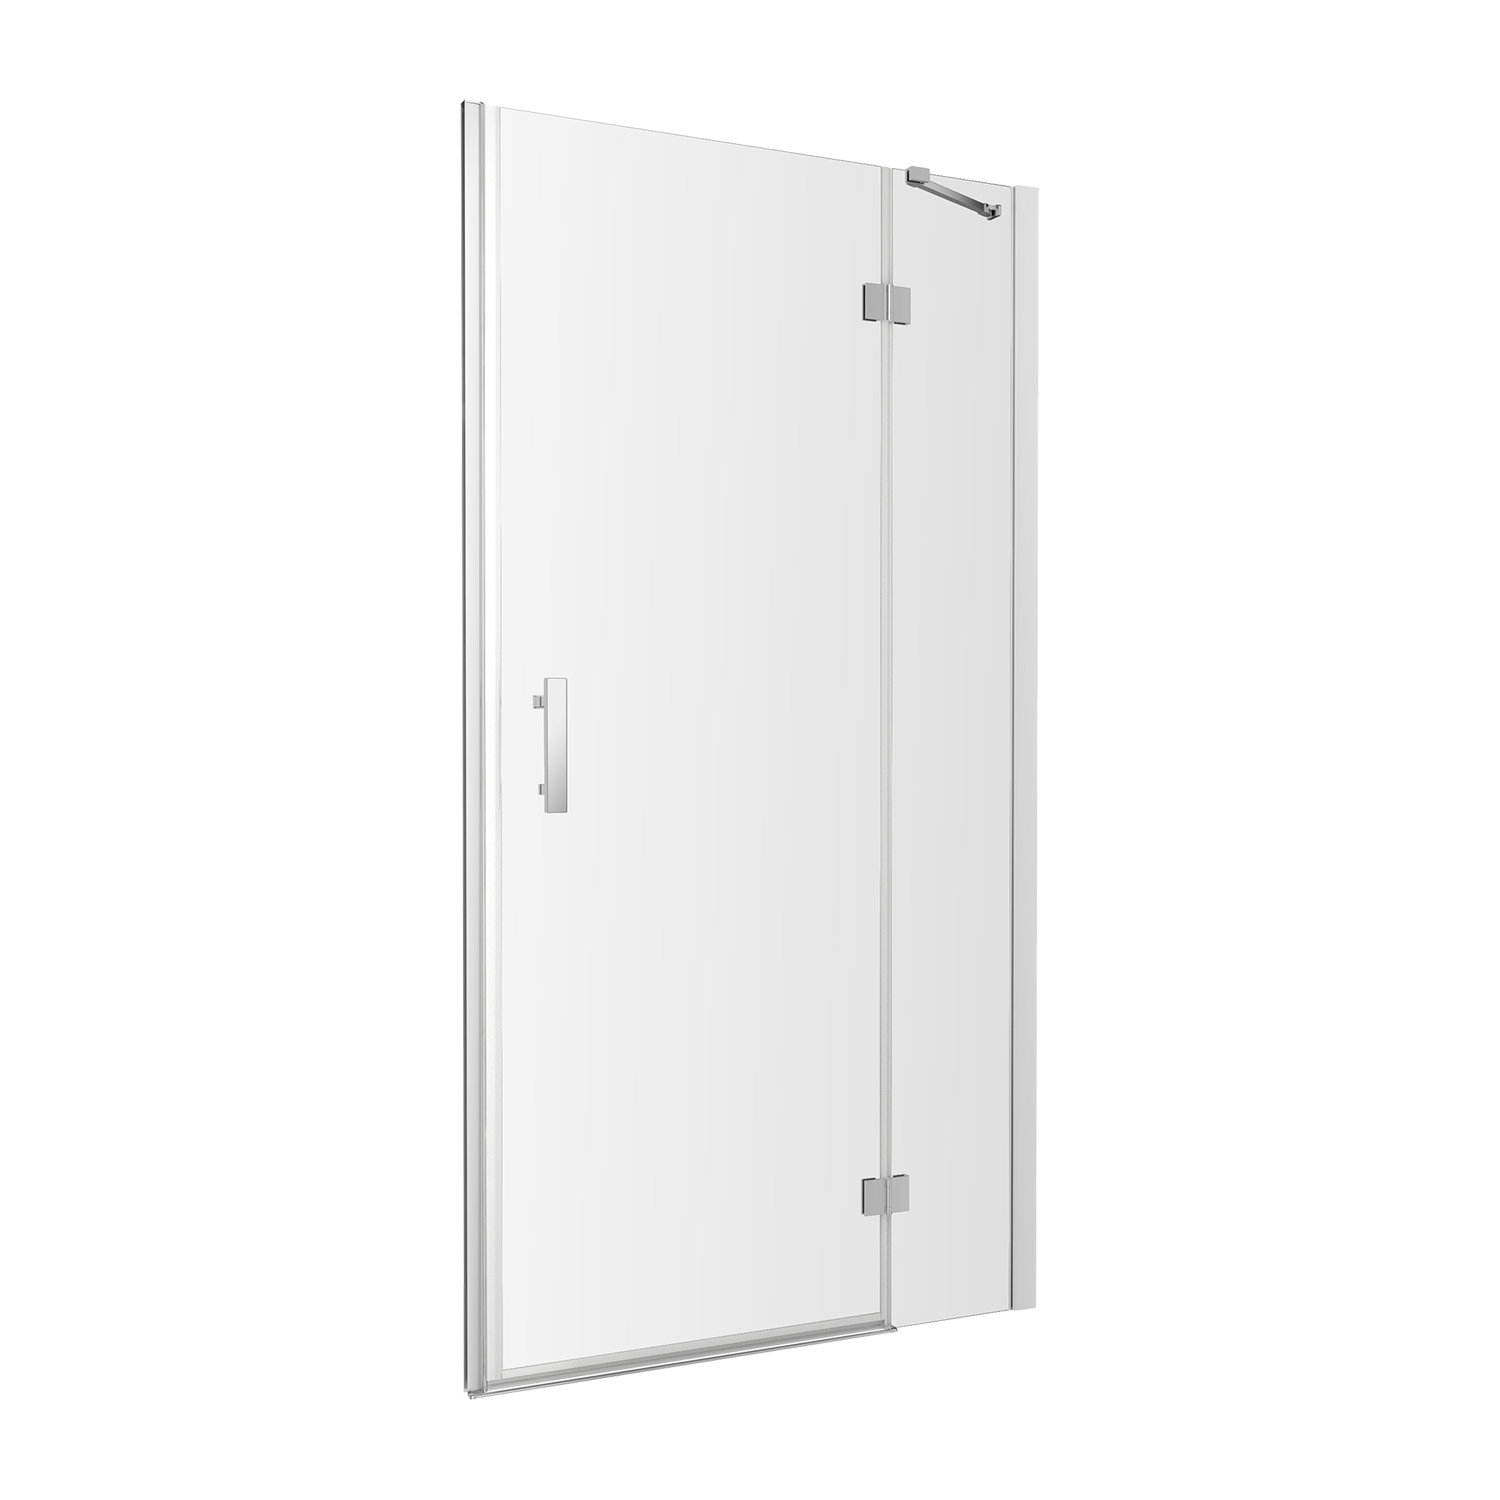 shower enclosure element: side wall with door, 120 cm